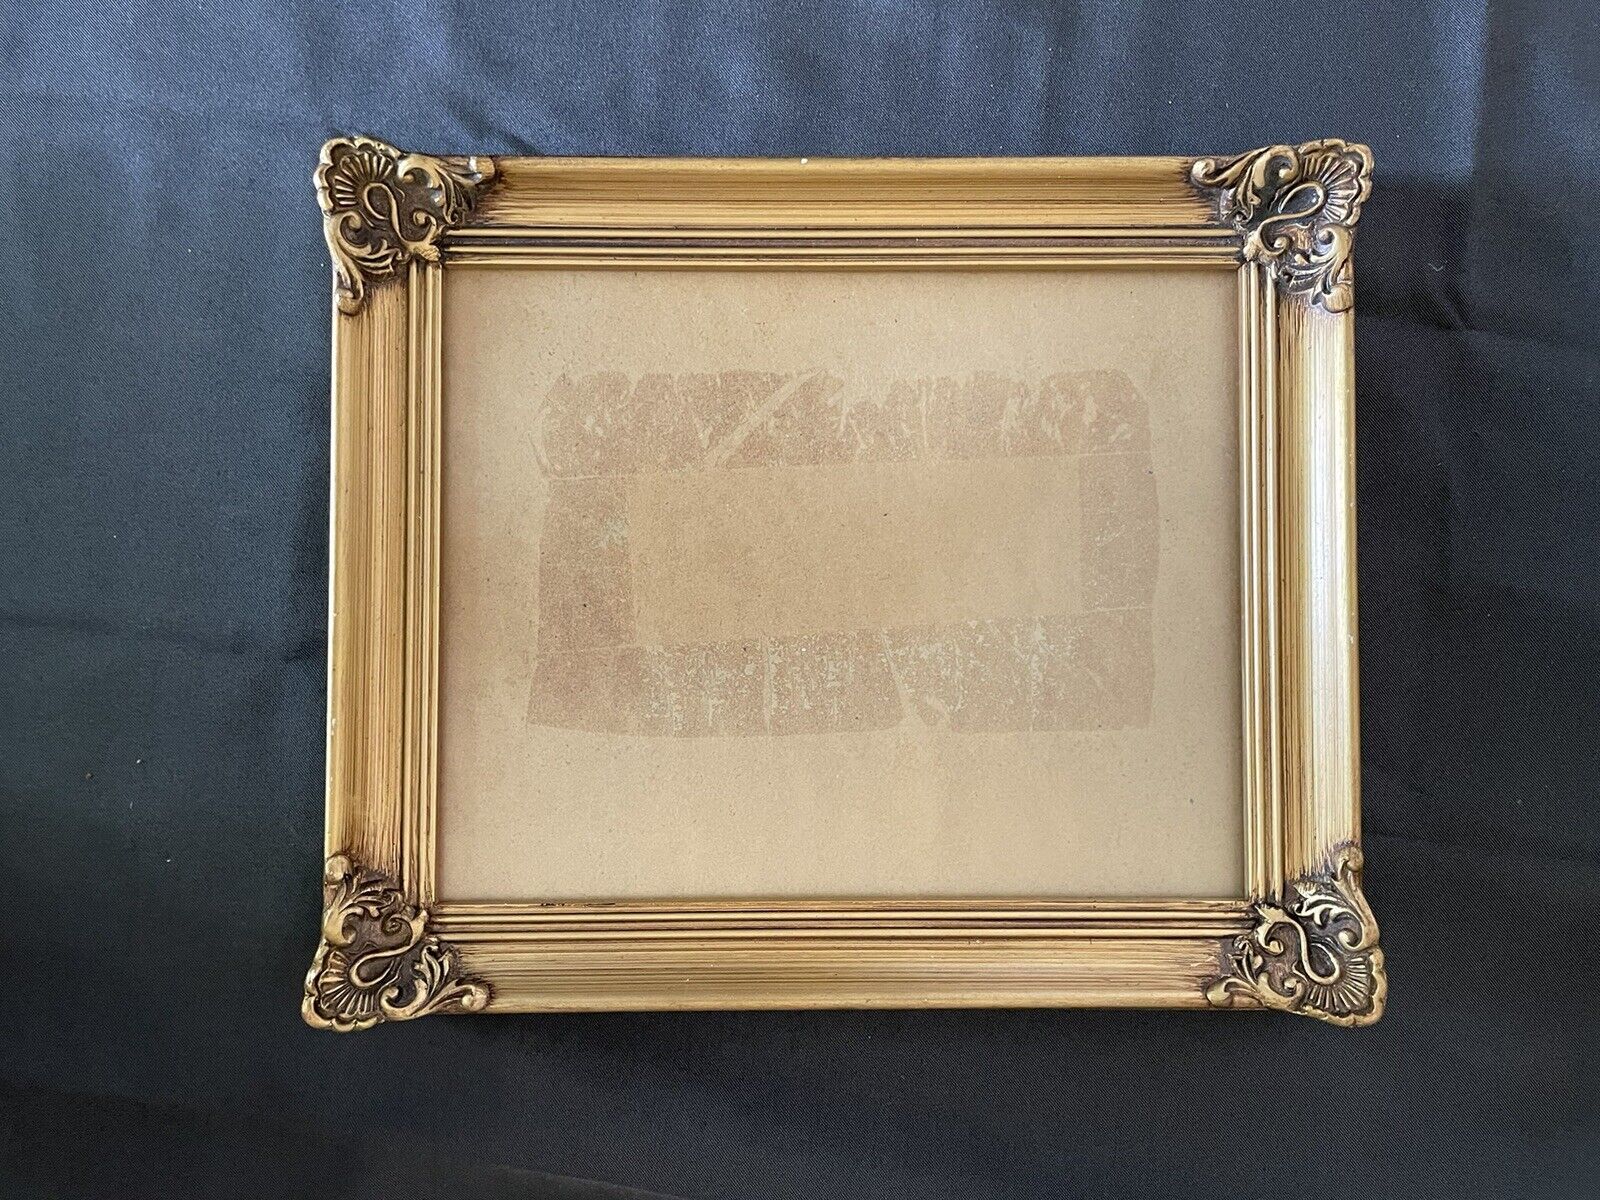 VINTAGE ORNATE BAROQUE GOLD WOOD FRAME 10x12x1 Fit 8x10 With Frosted Glass